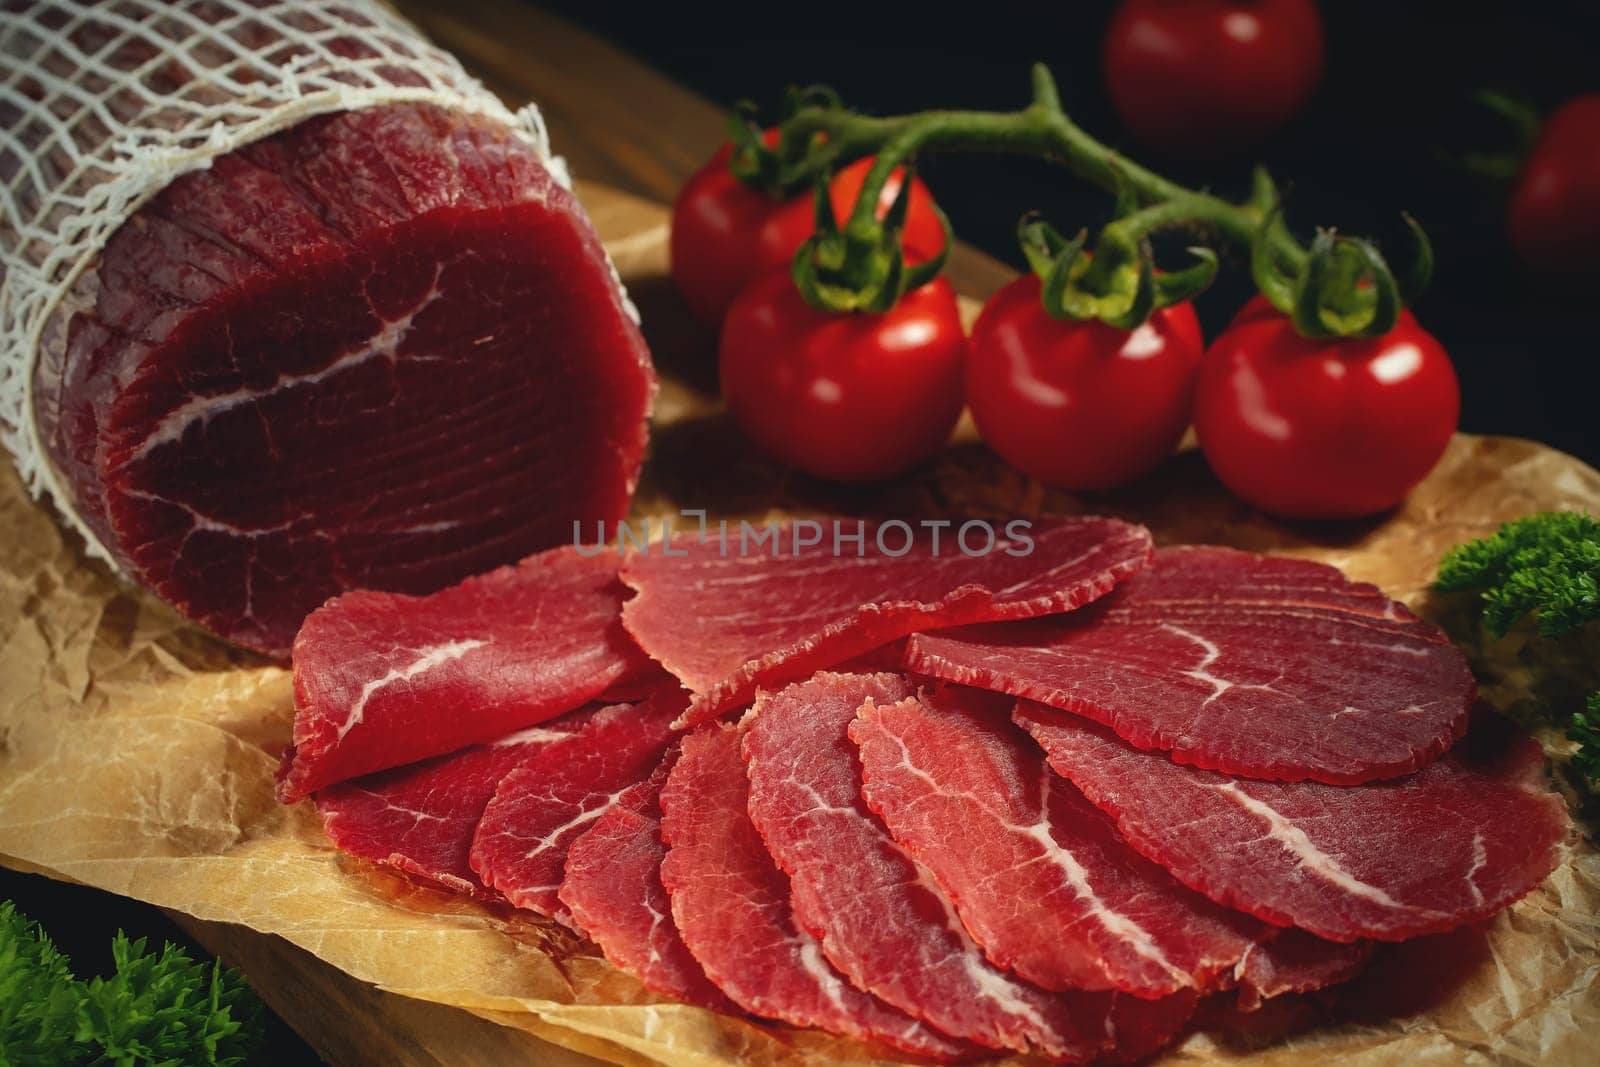 Whole and sliced bresaola on paper on a cutting board with tomatoes.